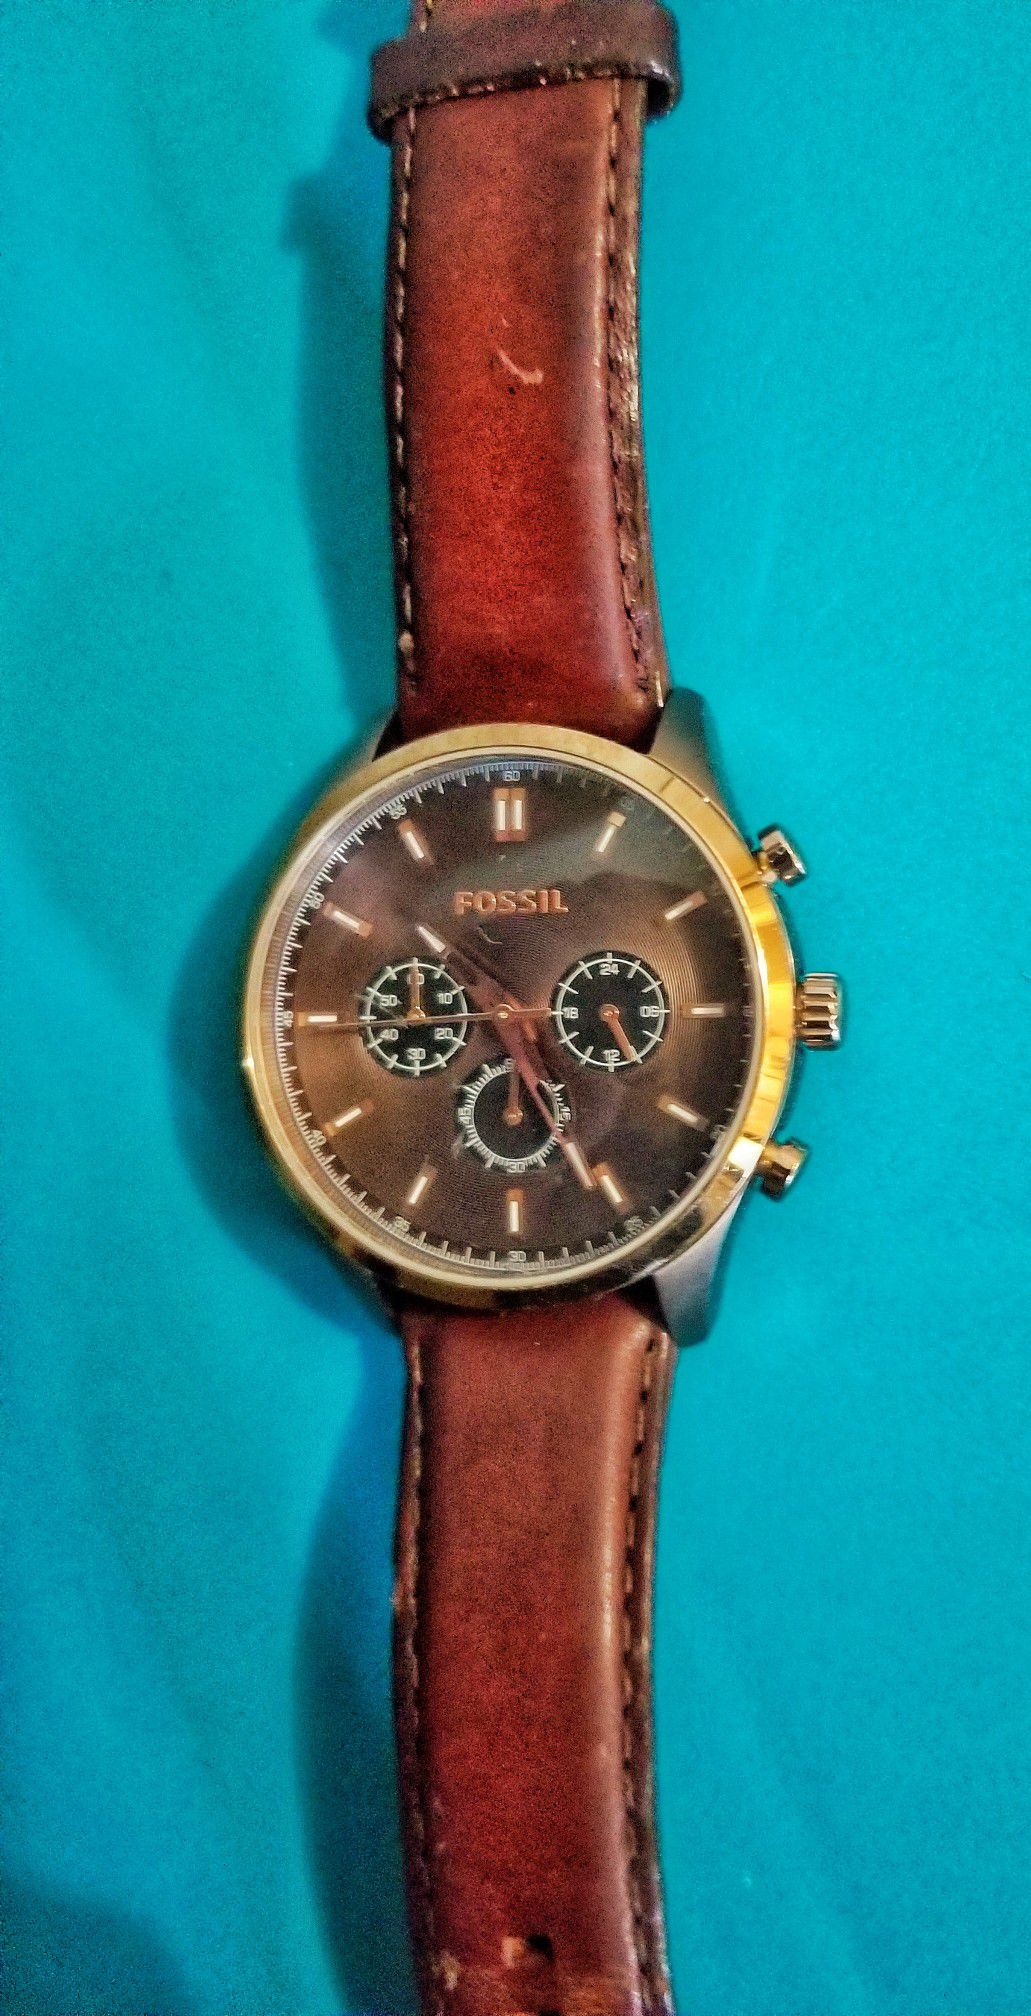 Authentic fossil watch Fossil watch leather band great shape!